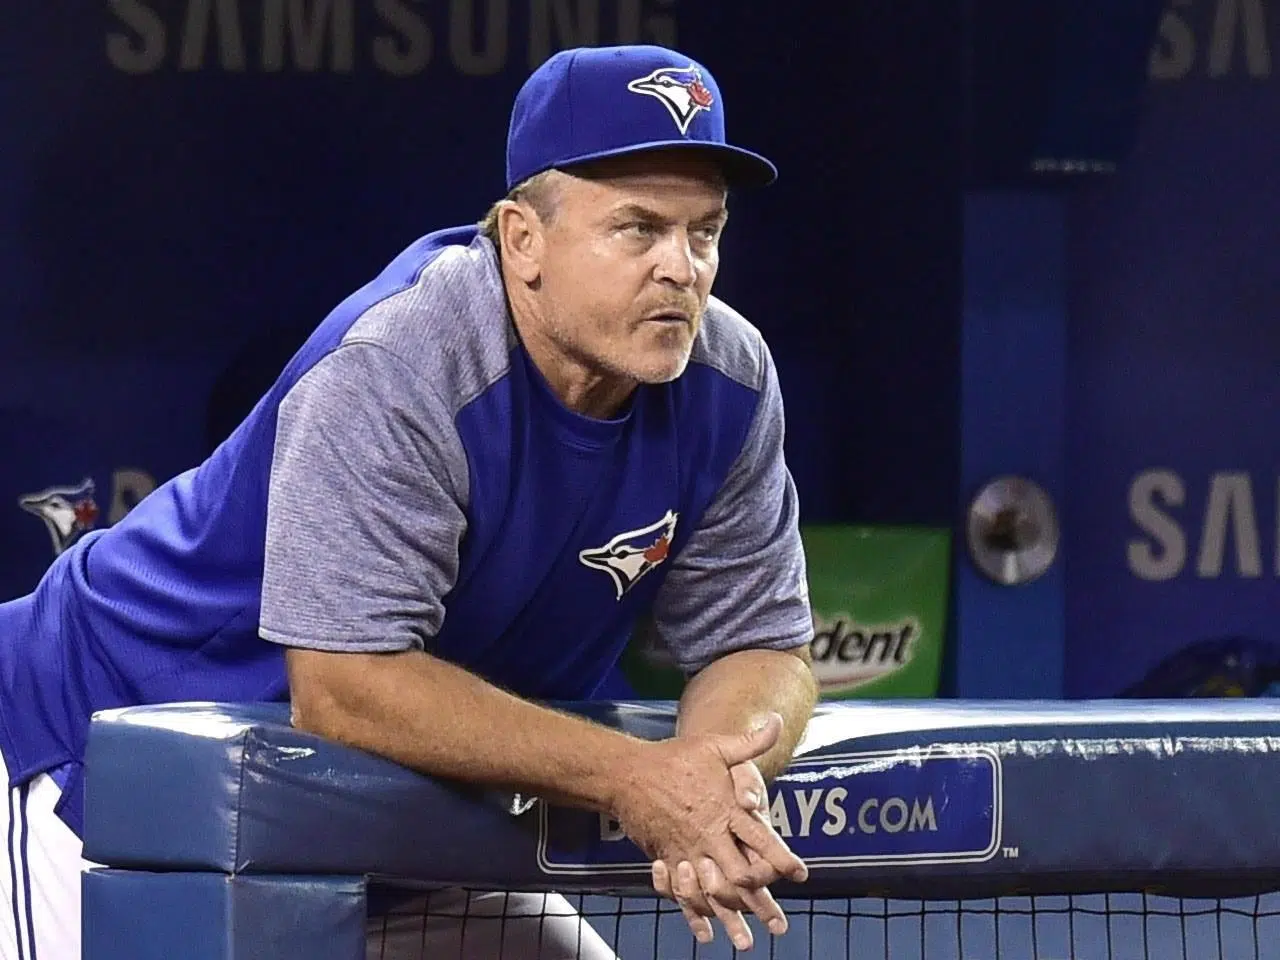 Toronto Blue Jays manager Carlos Tosca, left, argues with third